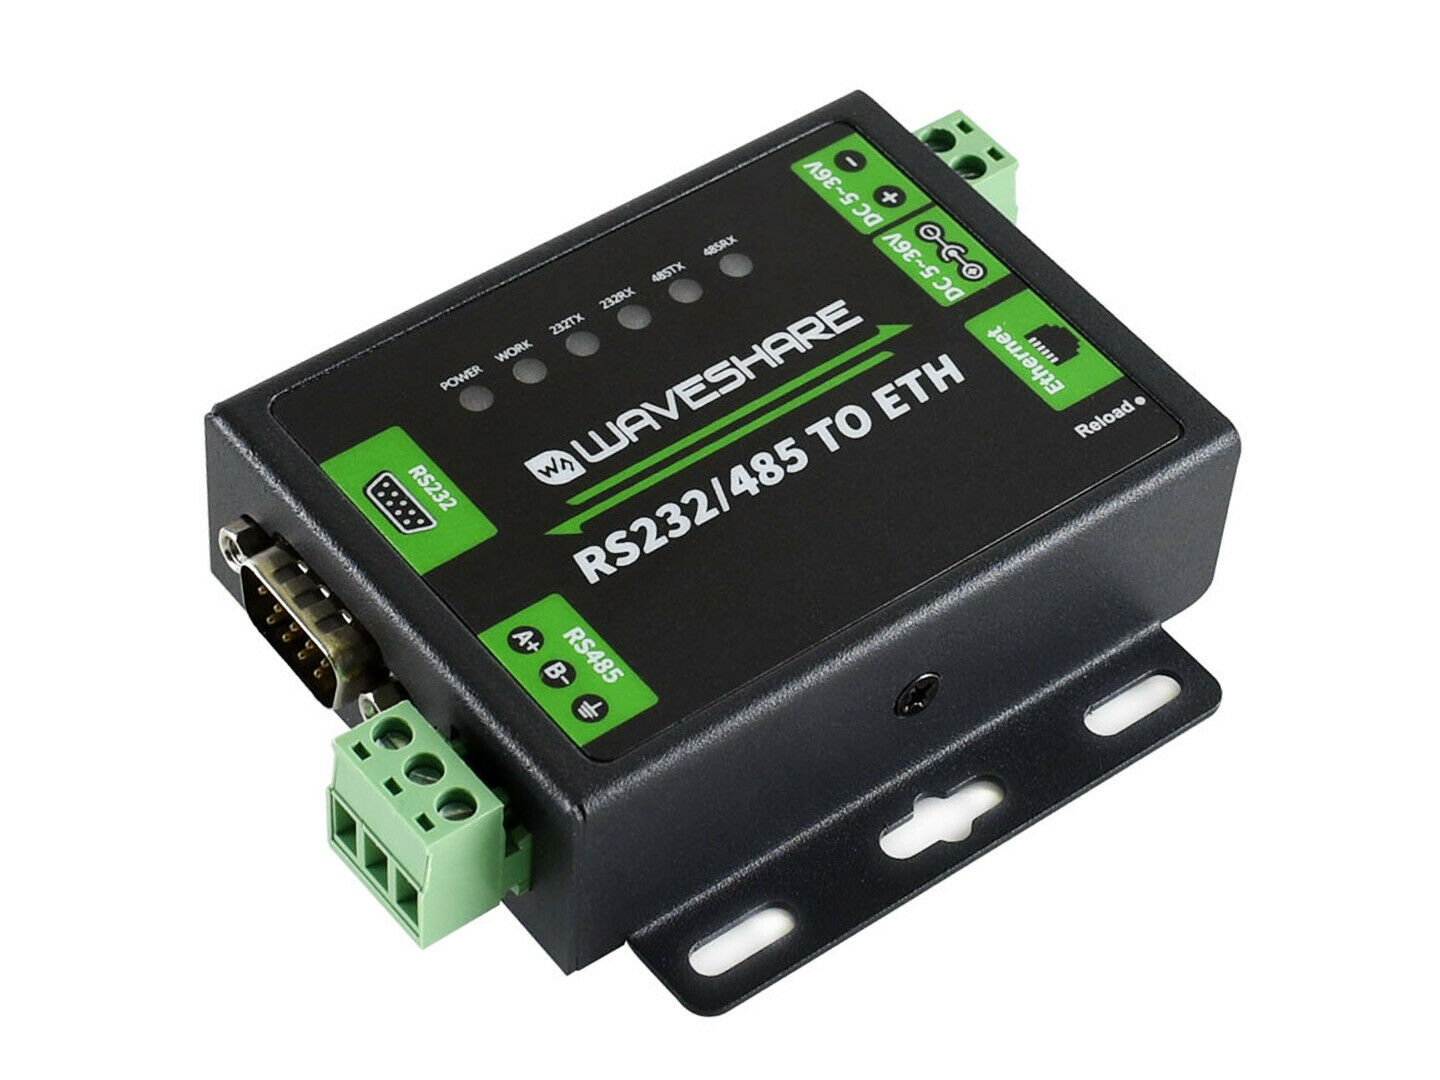 ethernet to rs485 converter